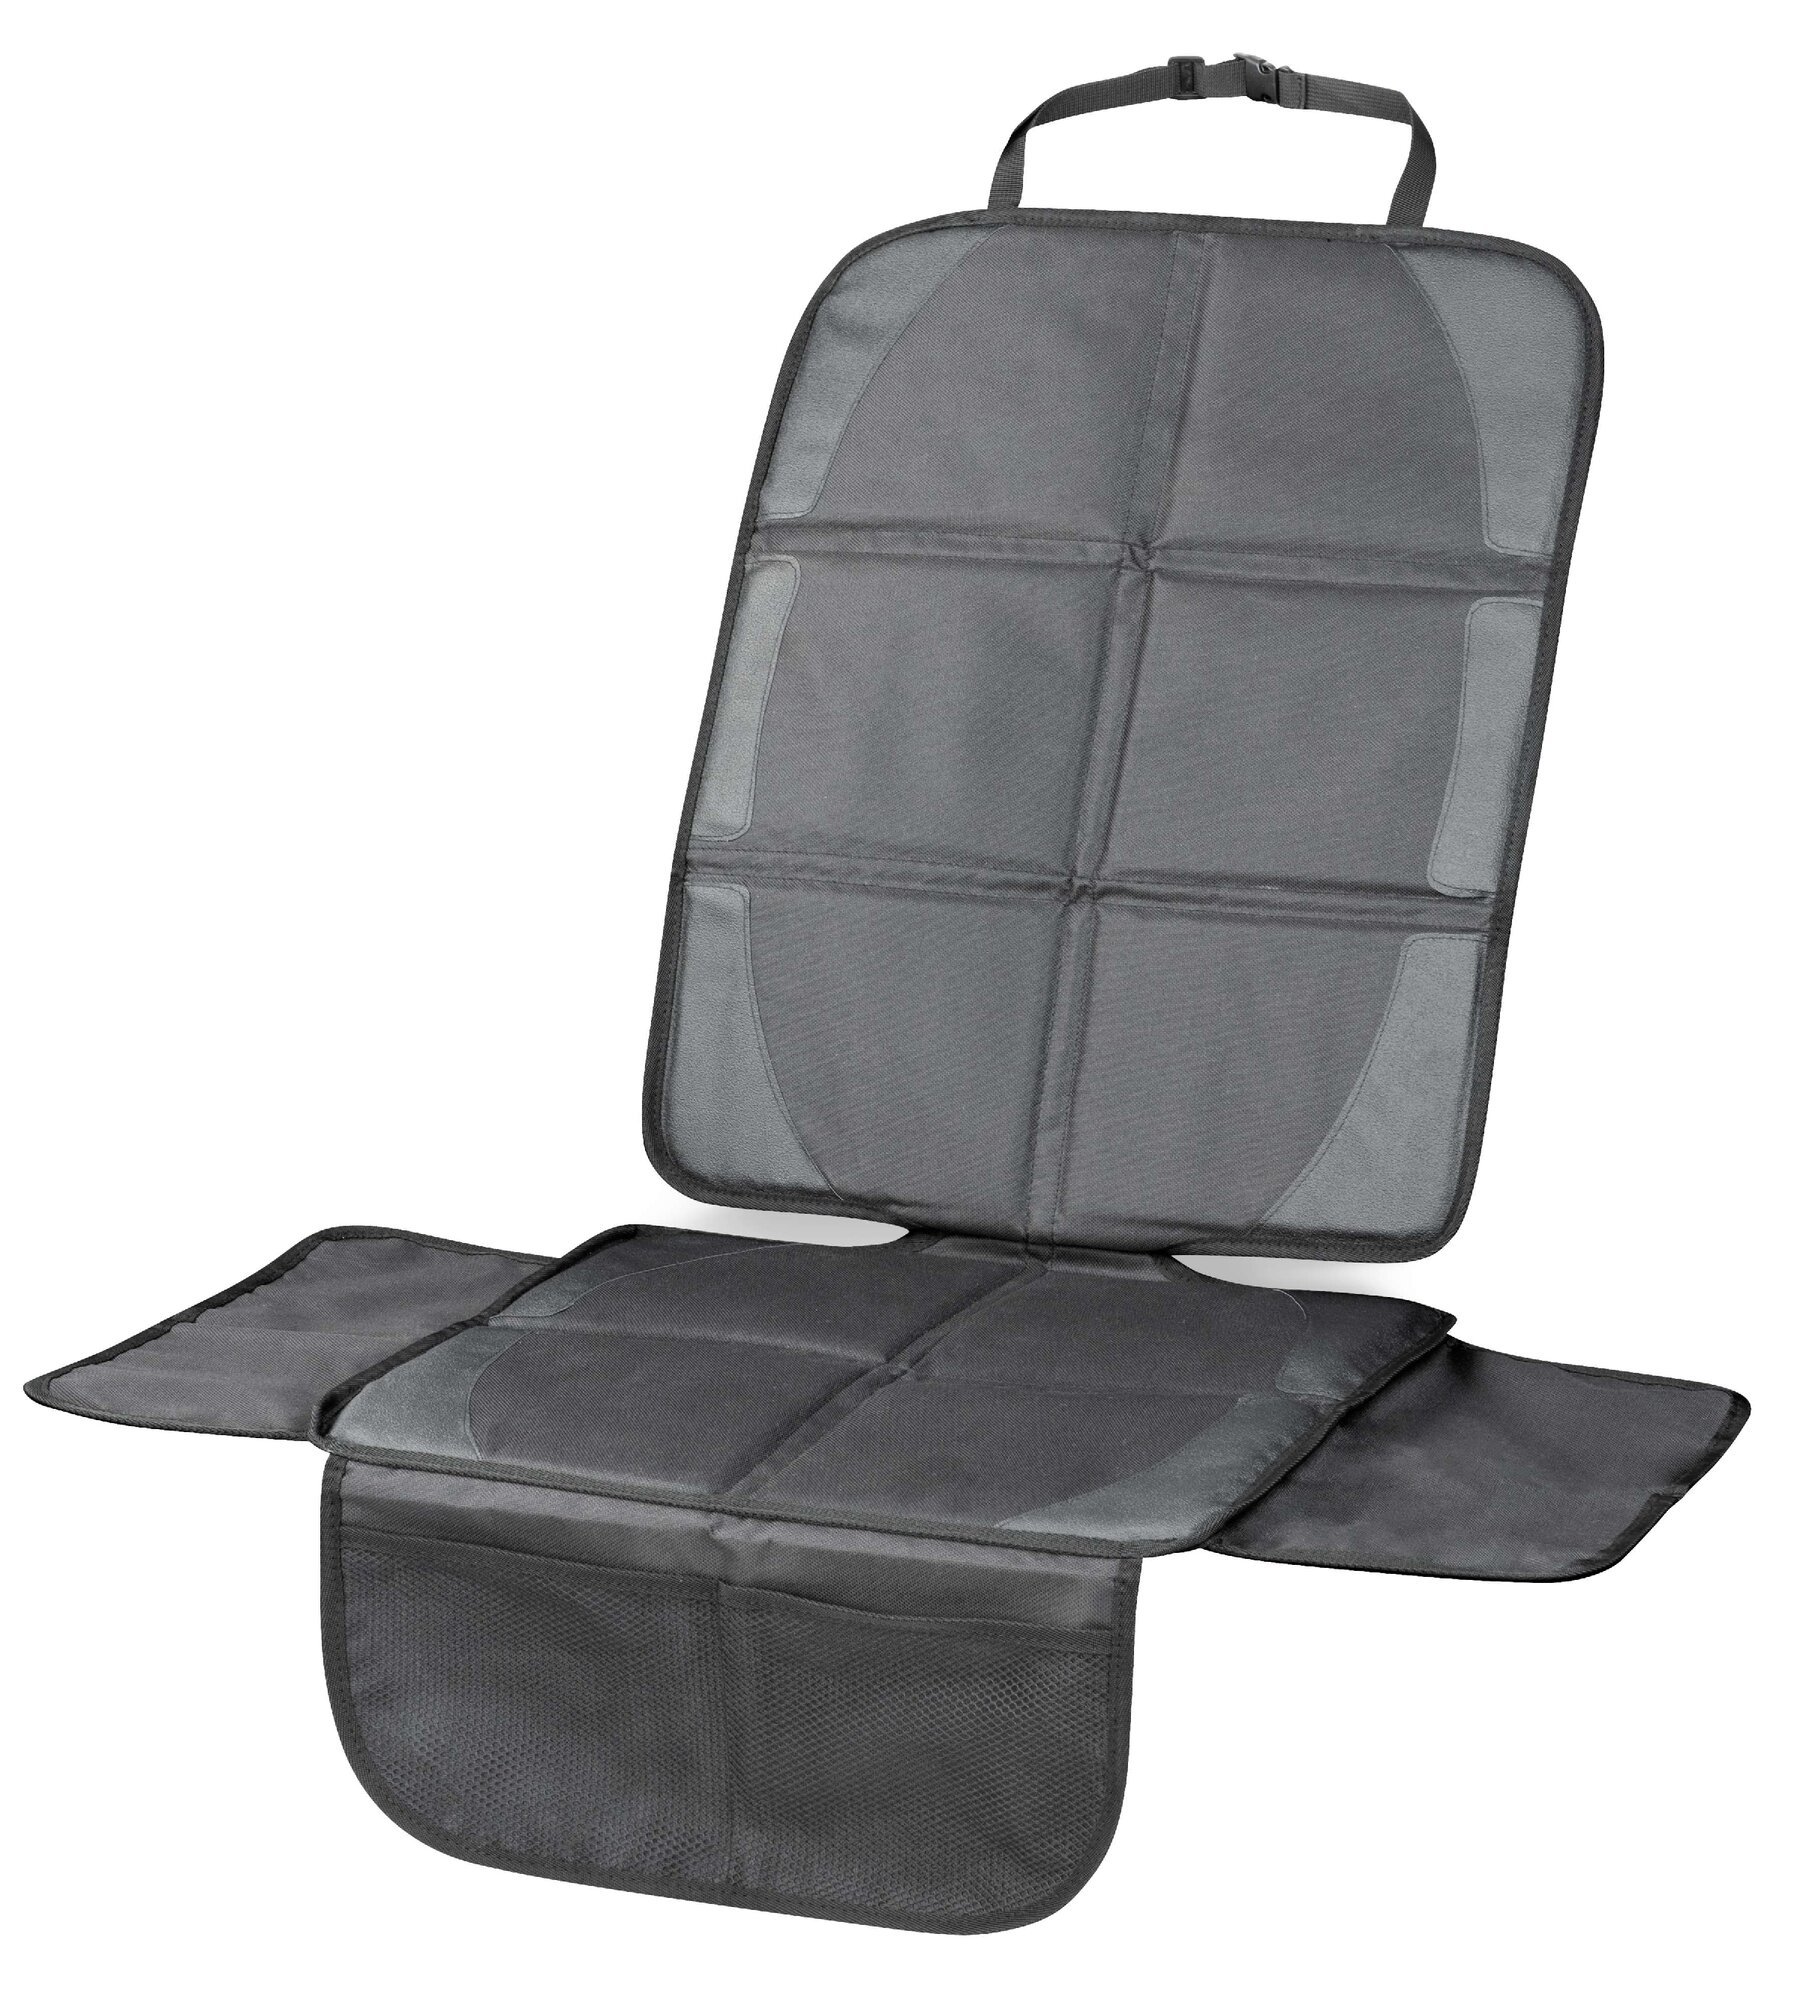 Child seat pad for car back Protect XL 122x47cm